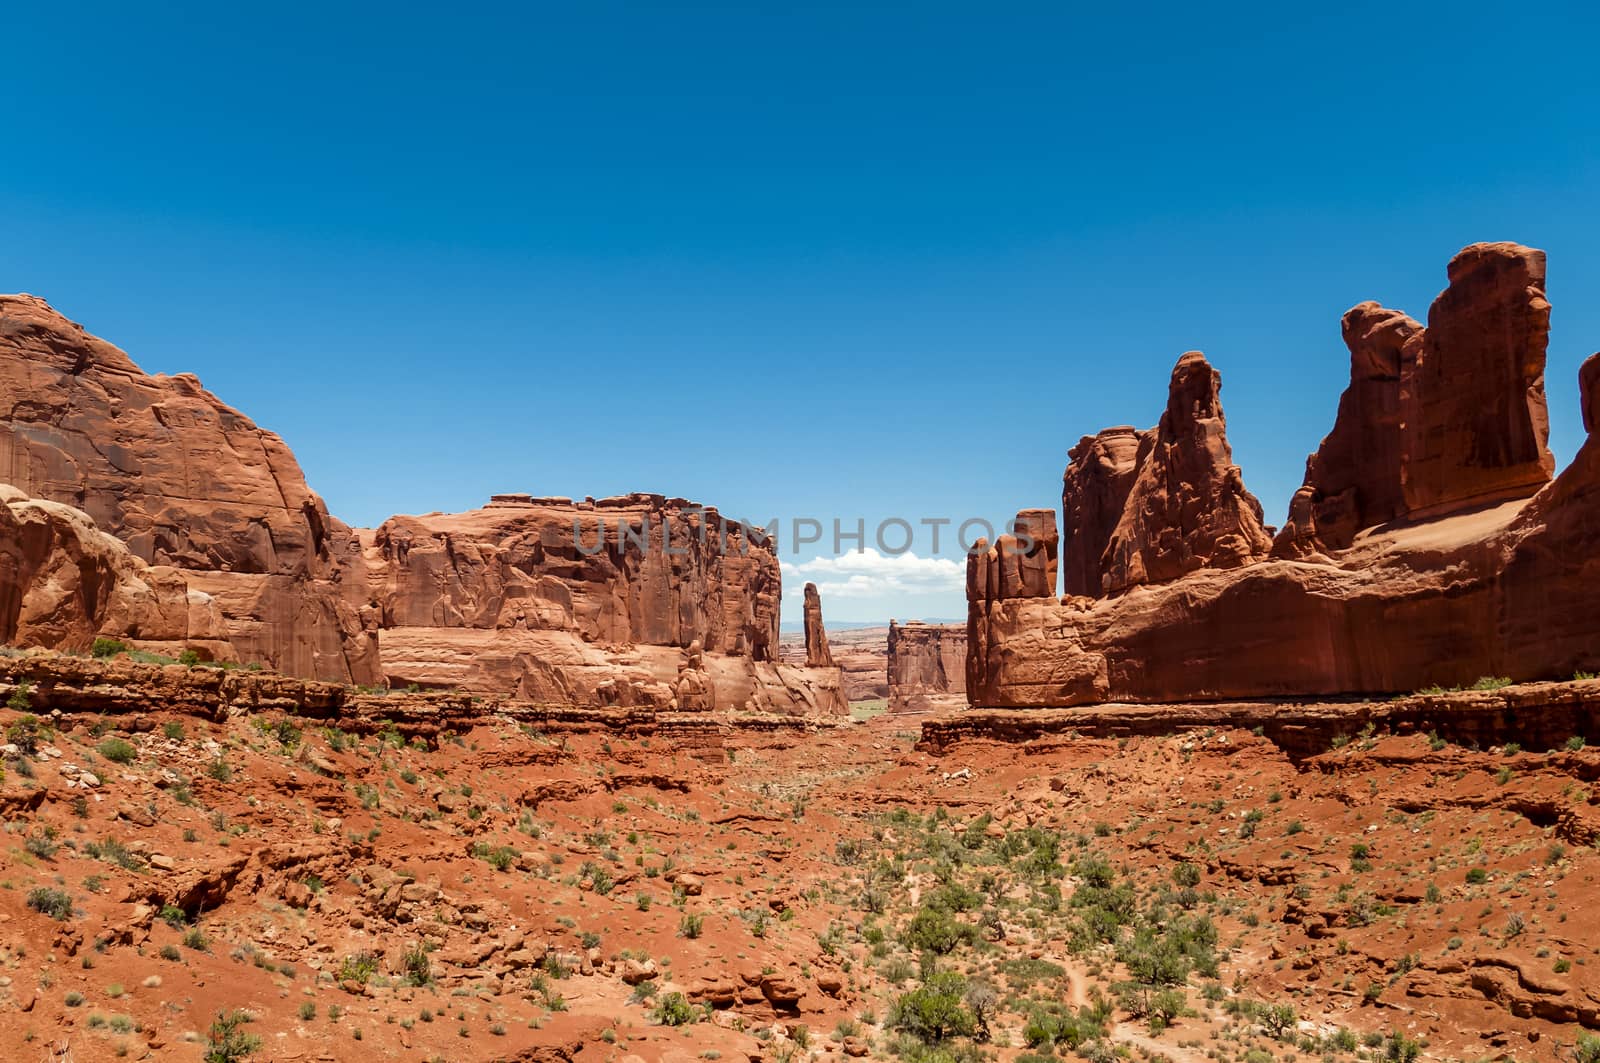 Park Avenue canyon at Arches National Park Utah by asafaric